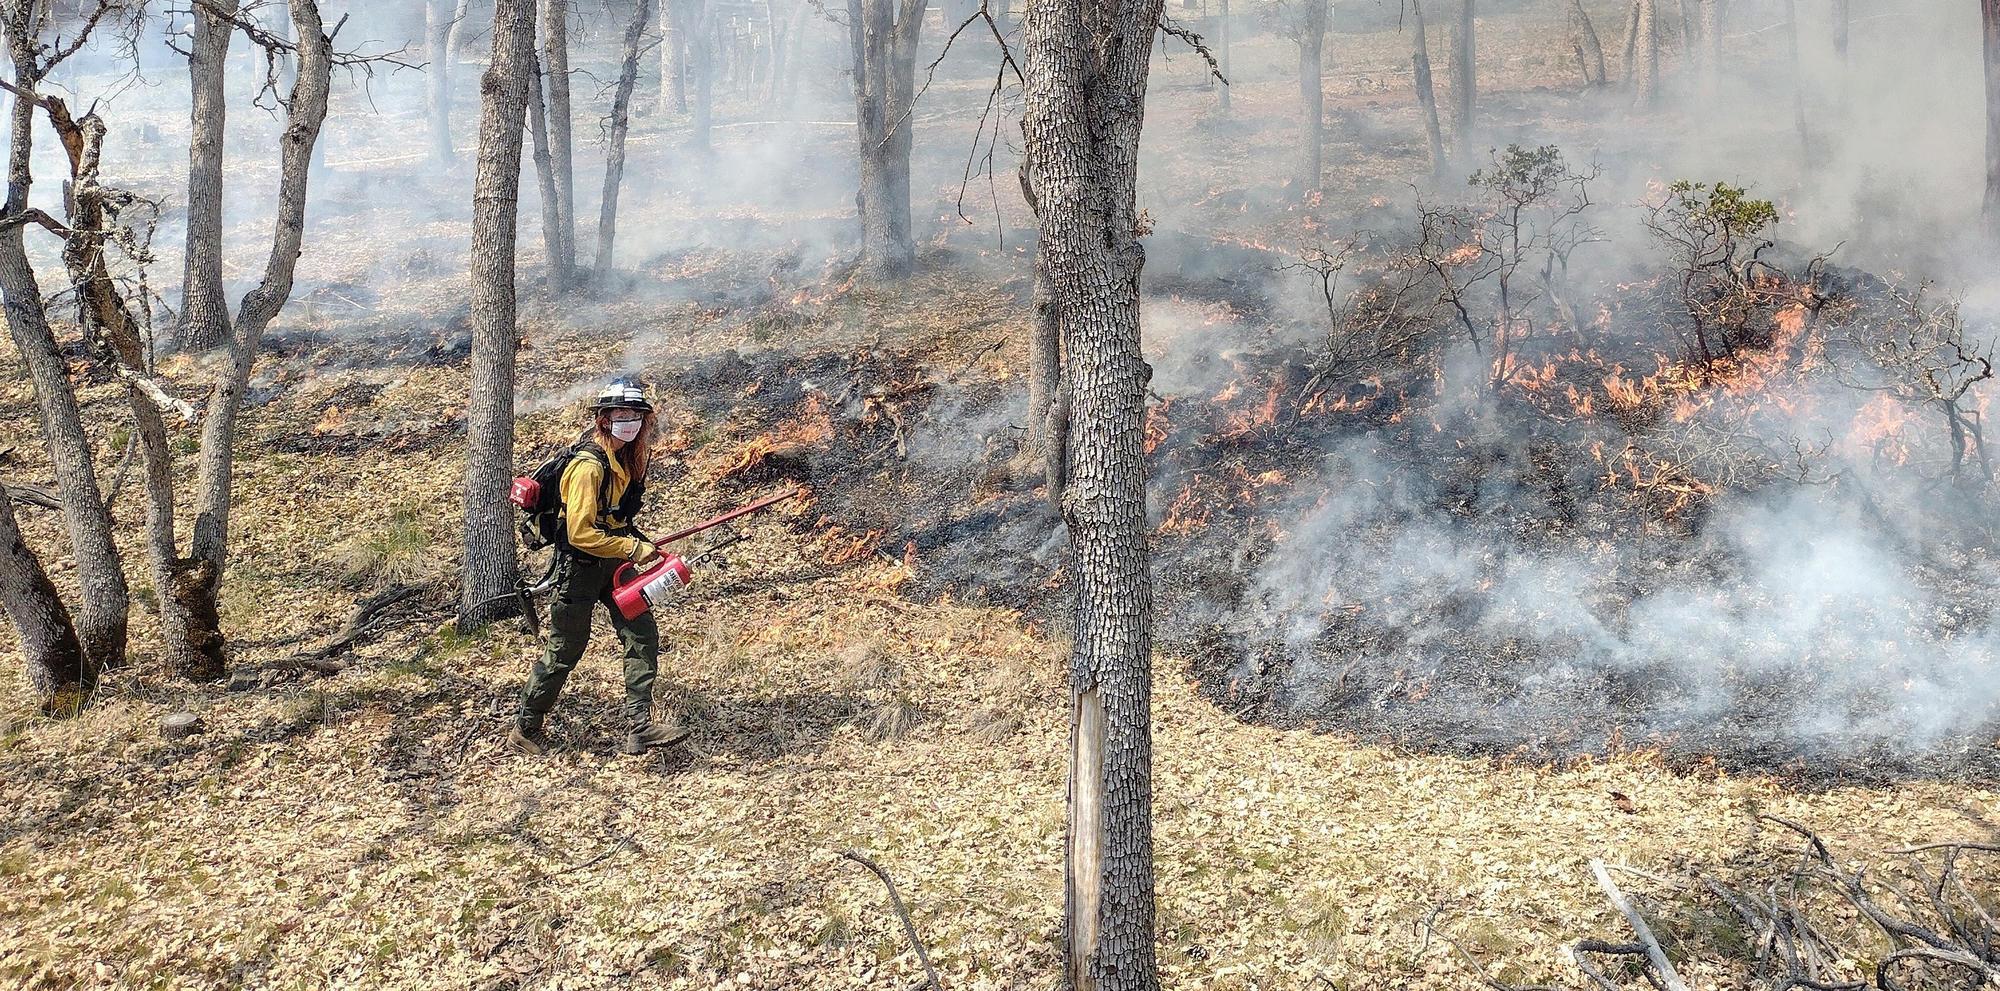 firefighter moves along smoky forest floor